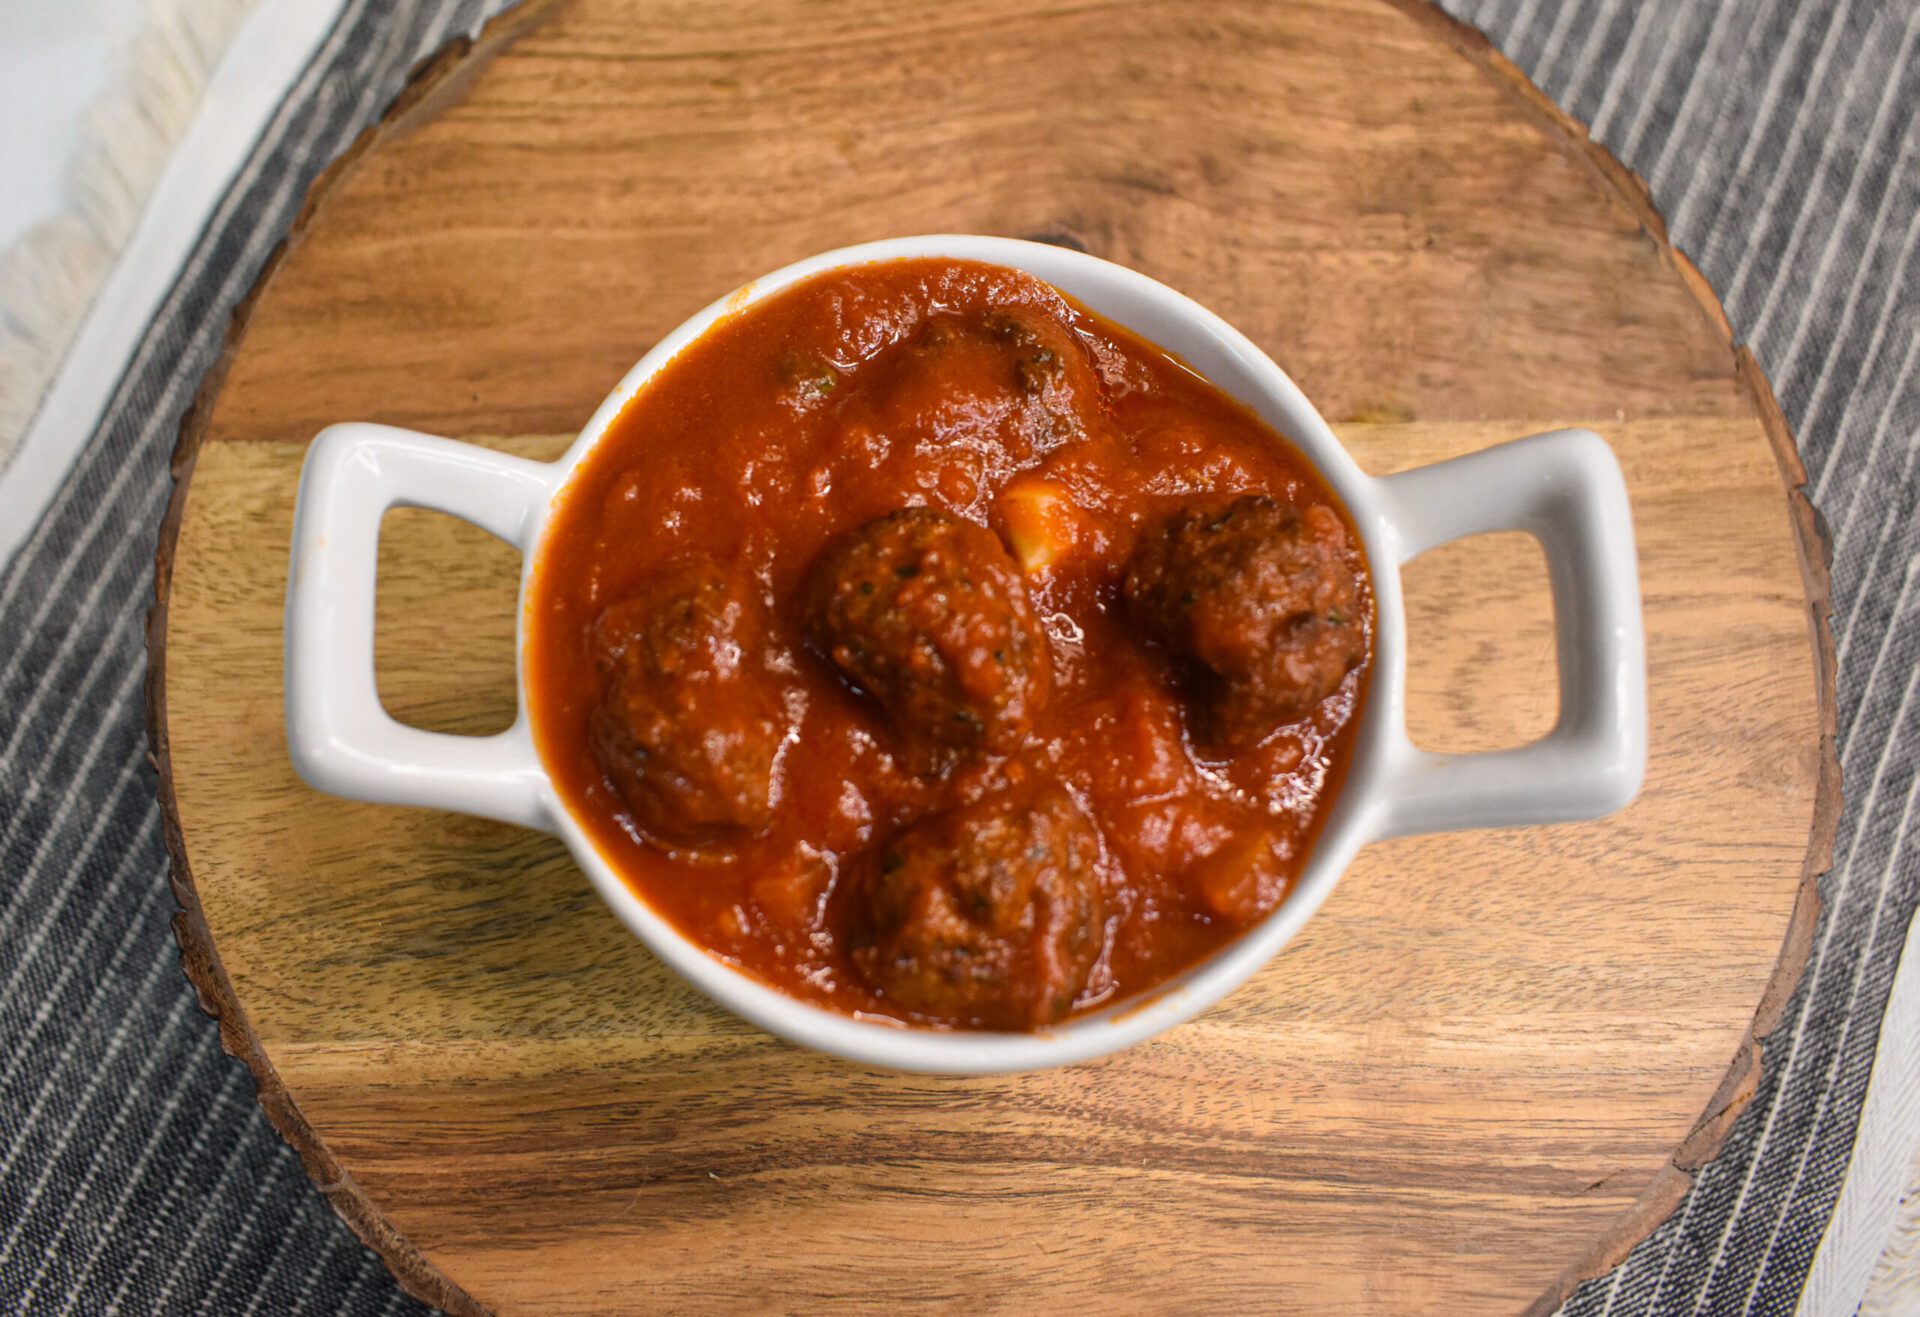 Meatballs in a bowl with sauce